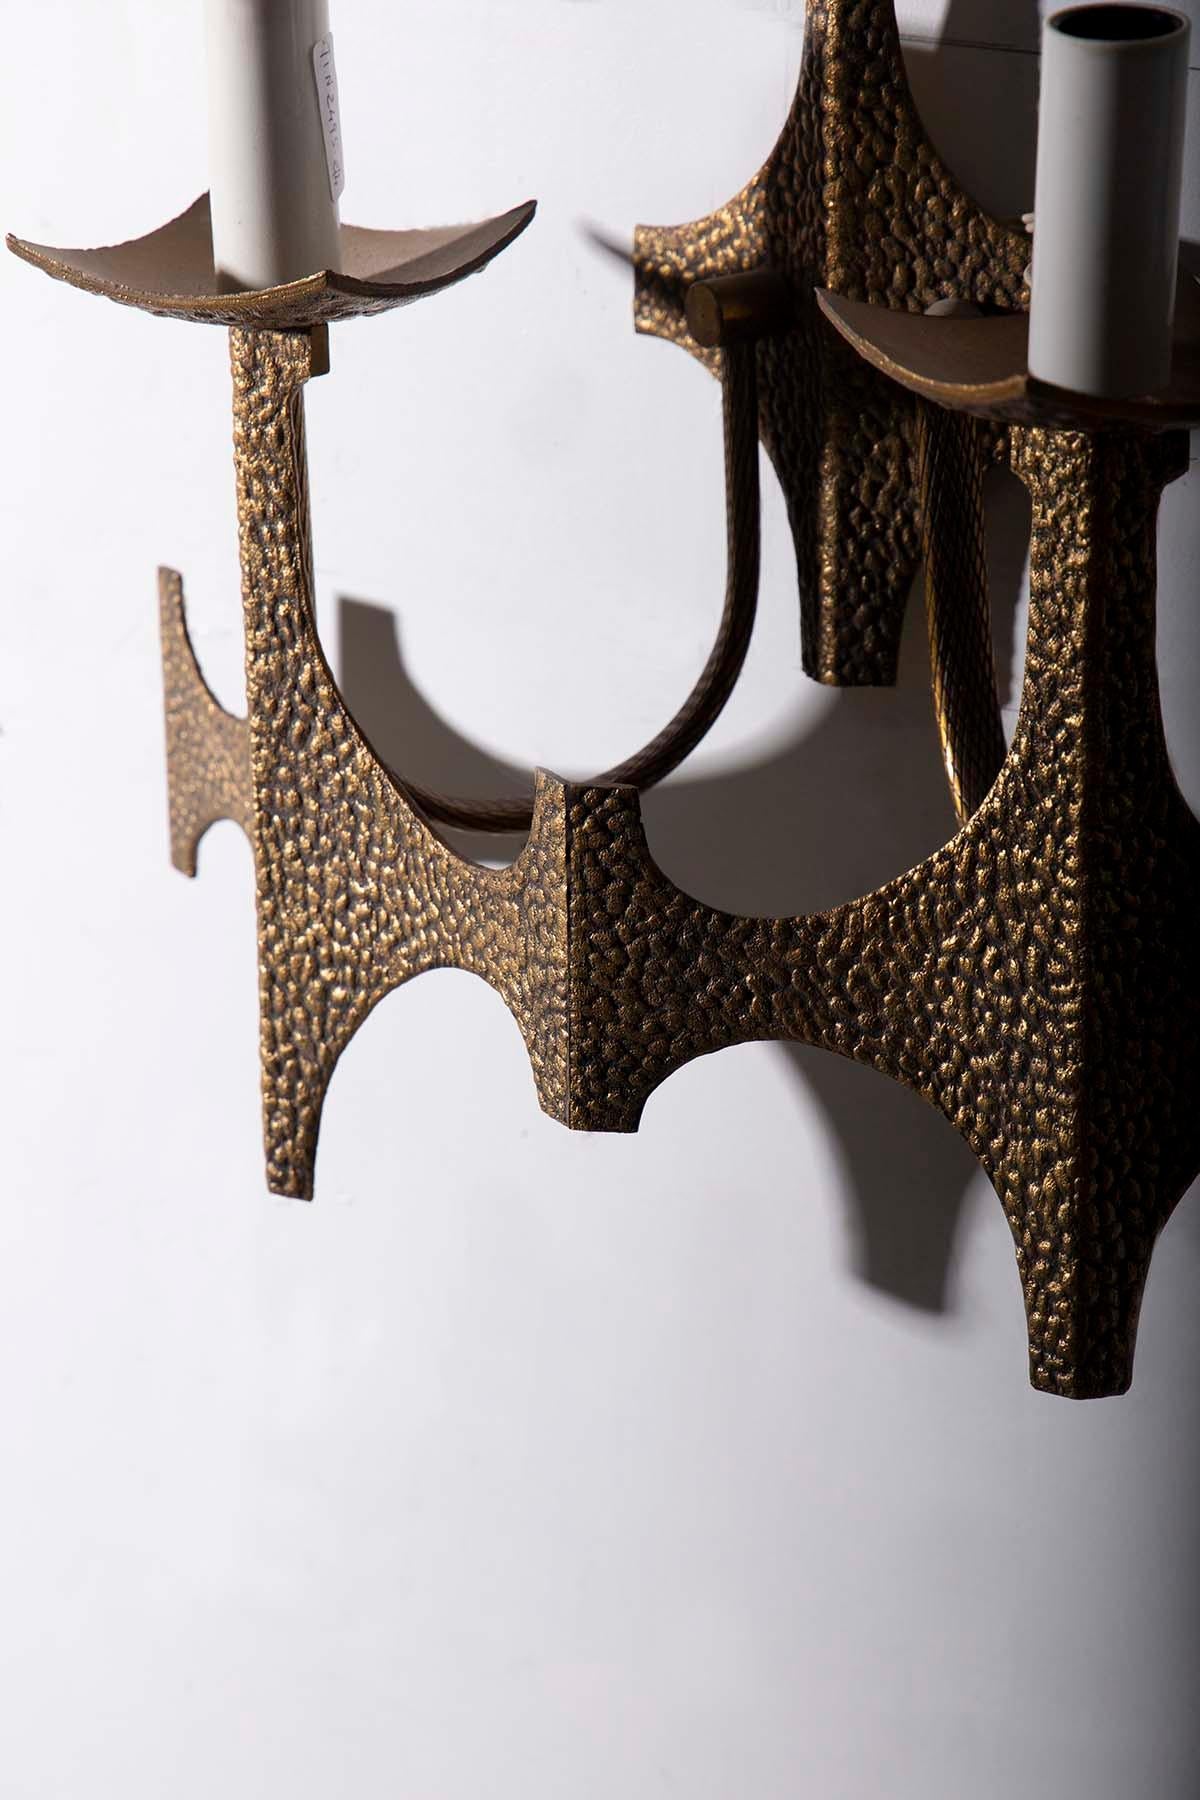 Imagine a pair of wall lamps that transport you back in time to the fascinating era of Italian Brutalism. These exquisite design pieces are made of brass, meticulously hammered by expert hands to achieve a deliberately rough appearance. Each lamp